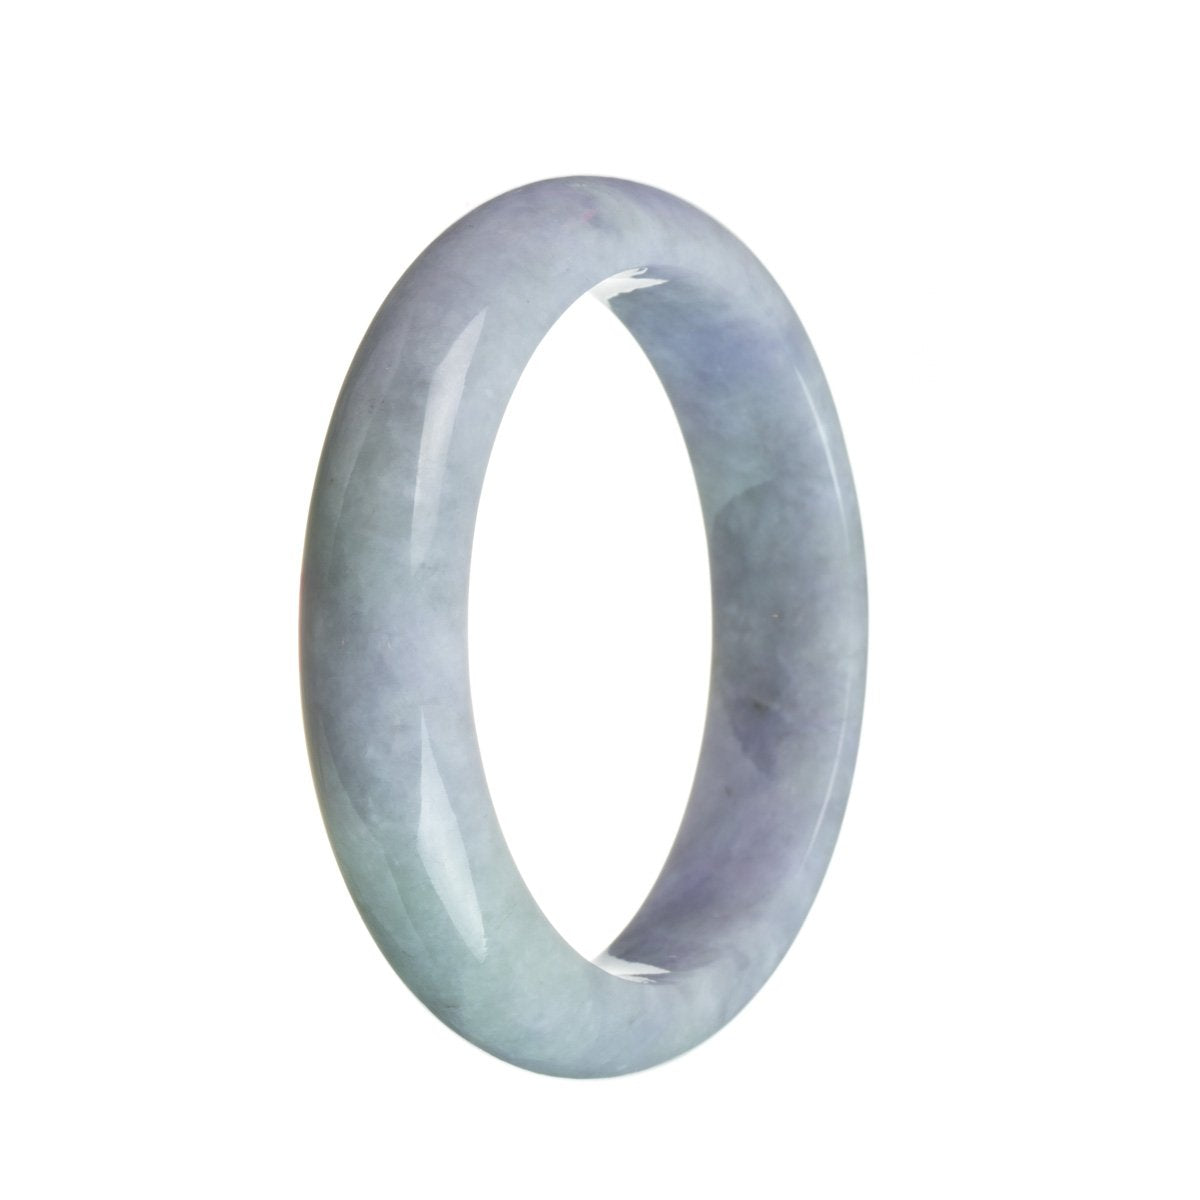 A close-up image of a beautiful lavender jade bracelet with a semi-round shape. The bracelet is made of genuine Type A strong jadeite jade and measures 58mm in size. It features a smooth and polished surface, showcasing the exquisite color and natural patterns of the jade stone.